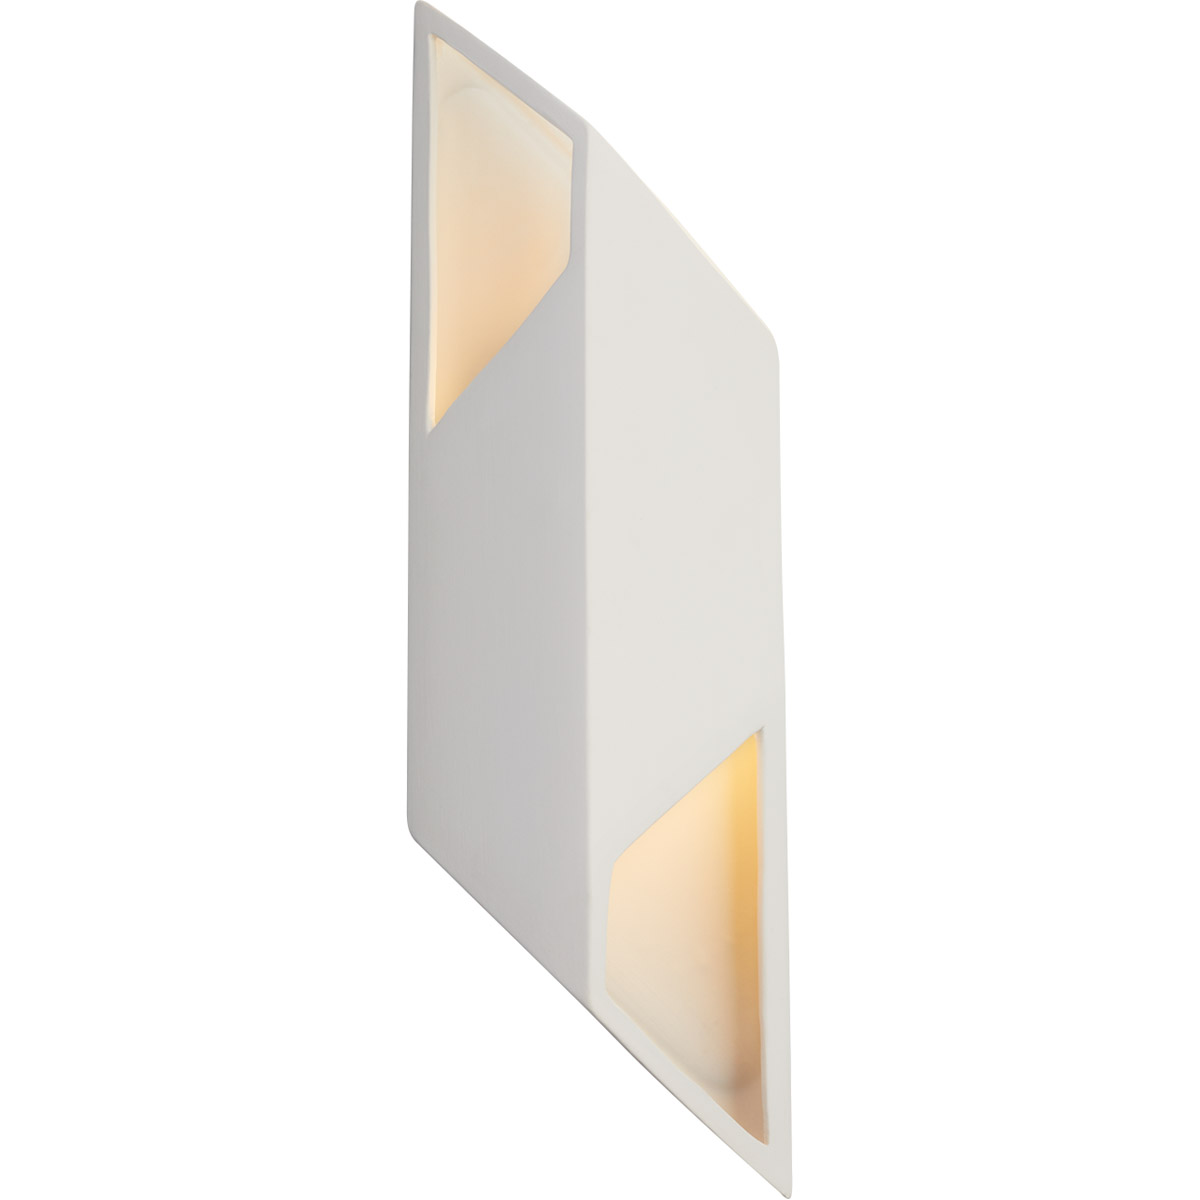 Justice Design CER-5845-RRST Ambiance LED 6 inch Real Rust ADA Wall Sconce  Wall Light, Rhomboid